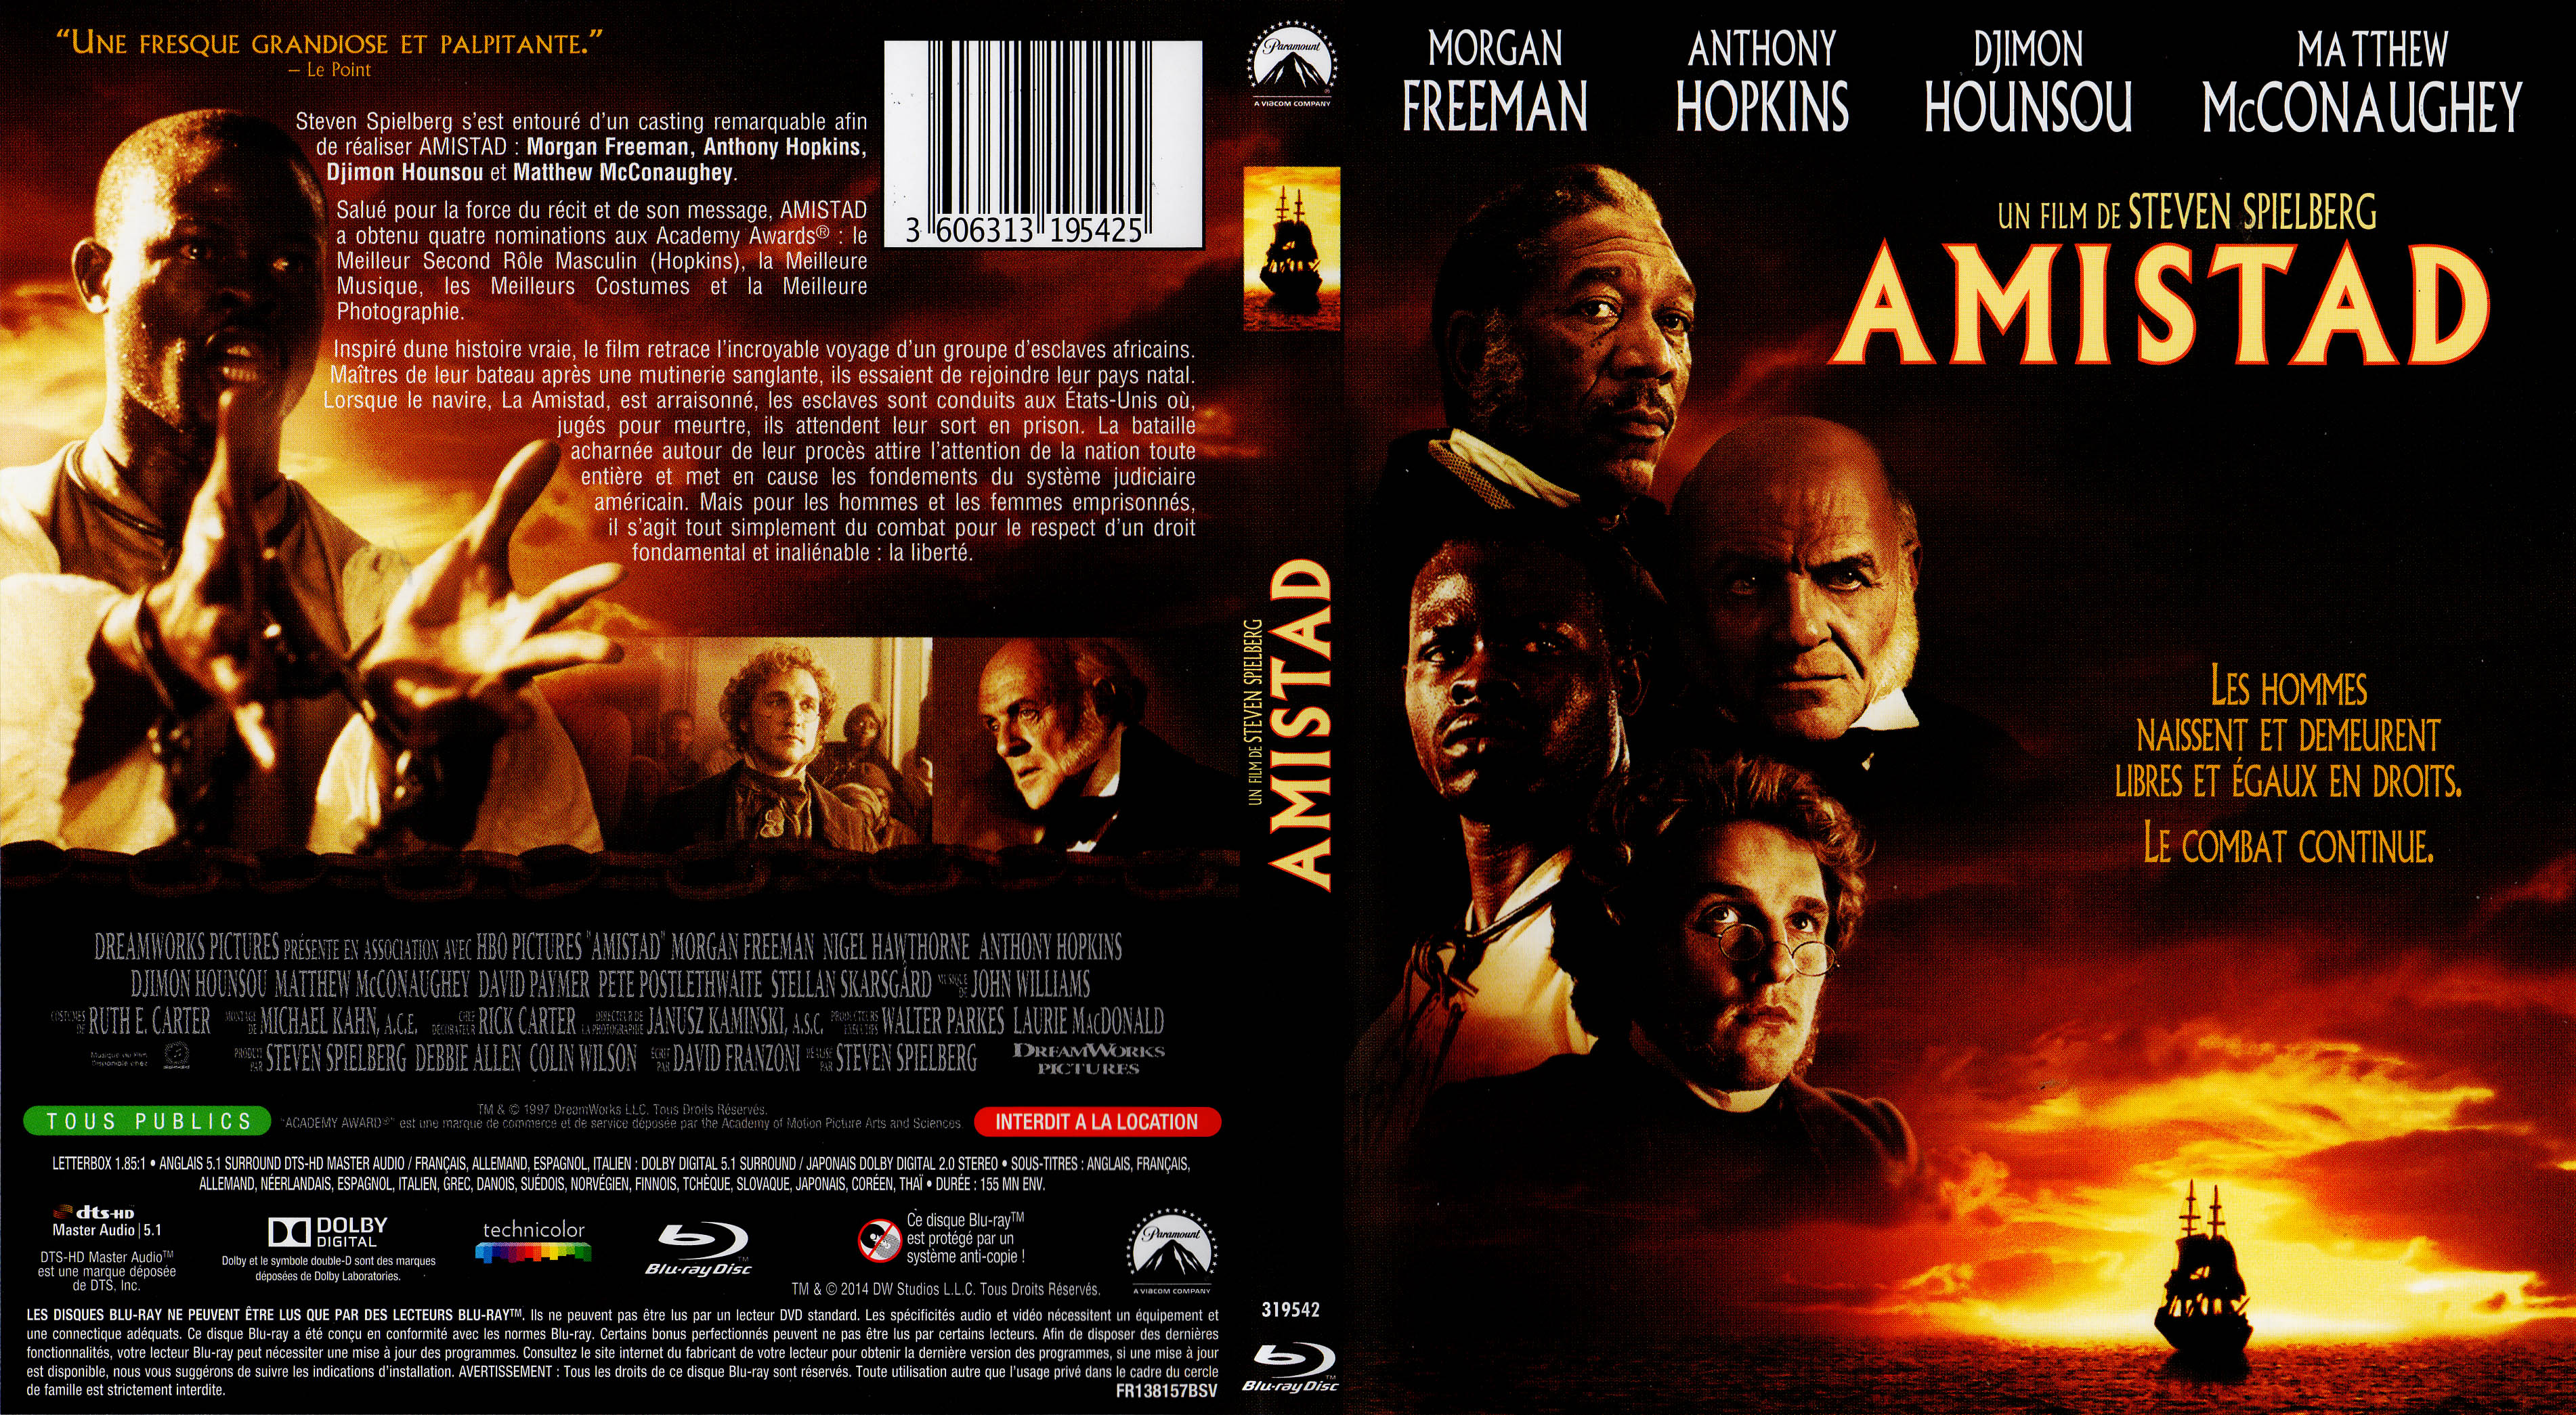 Jaquette DVD Amistad (BLU-RAY)